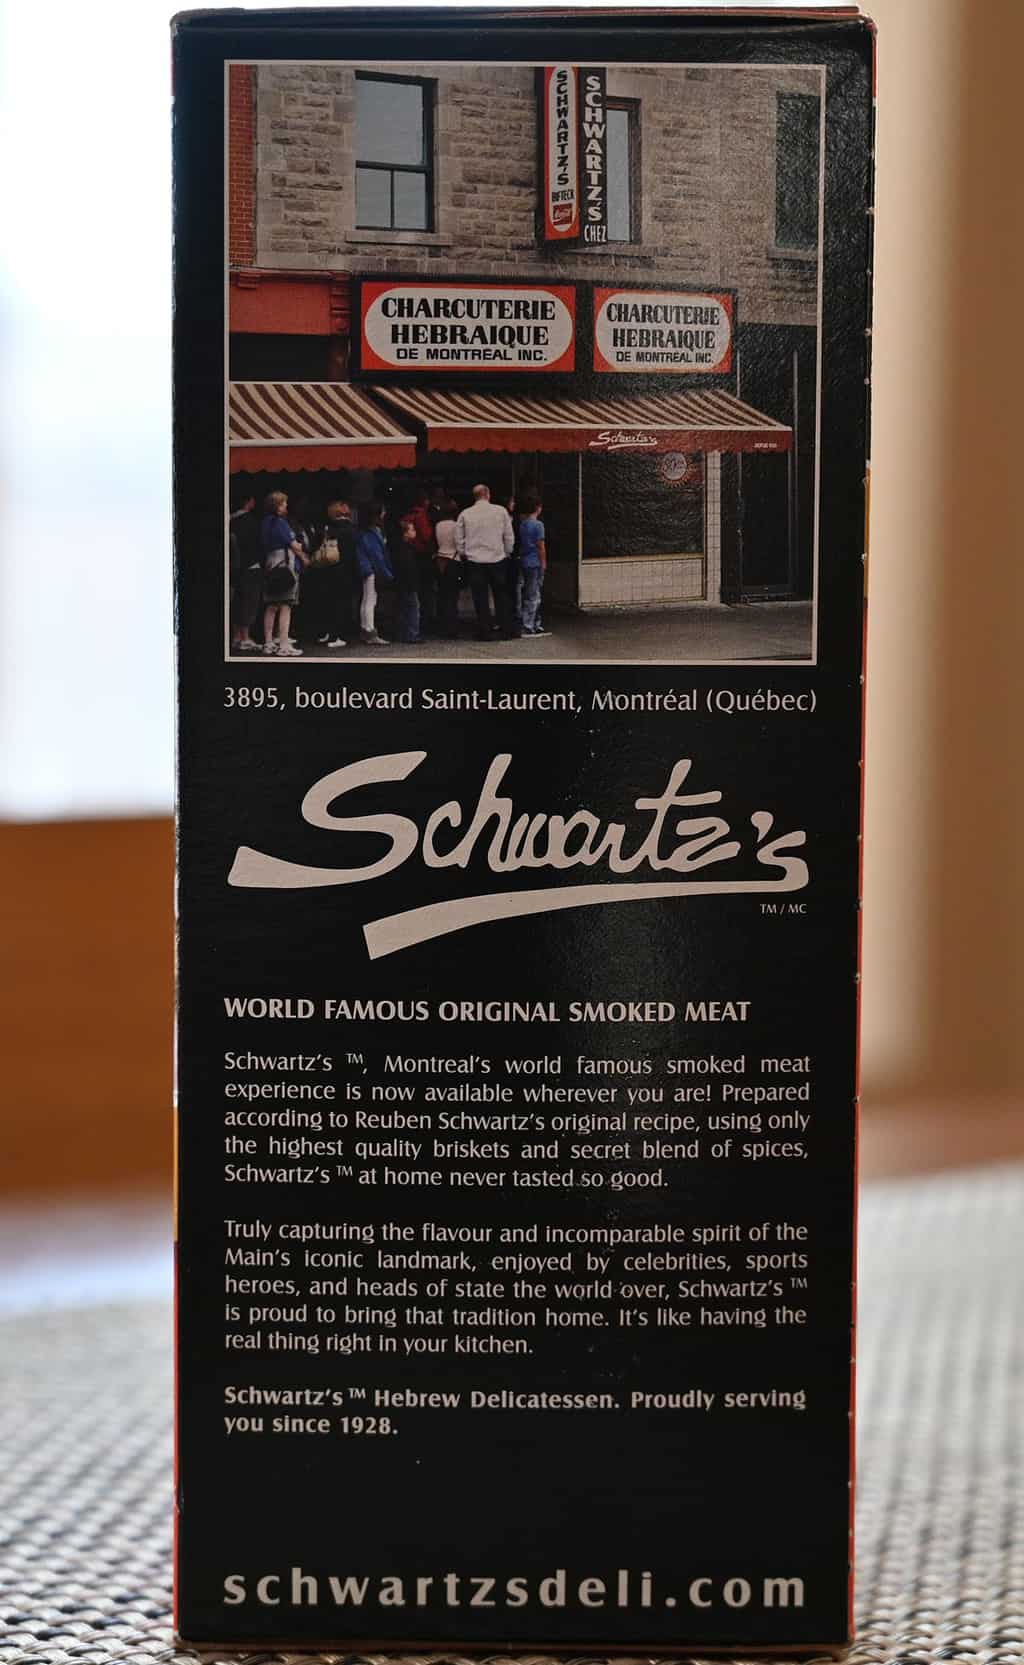 Schwartz's Smoked Meat company description from box. 